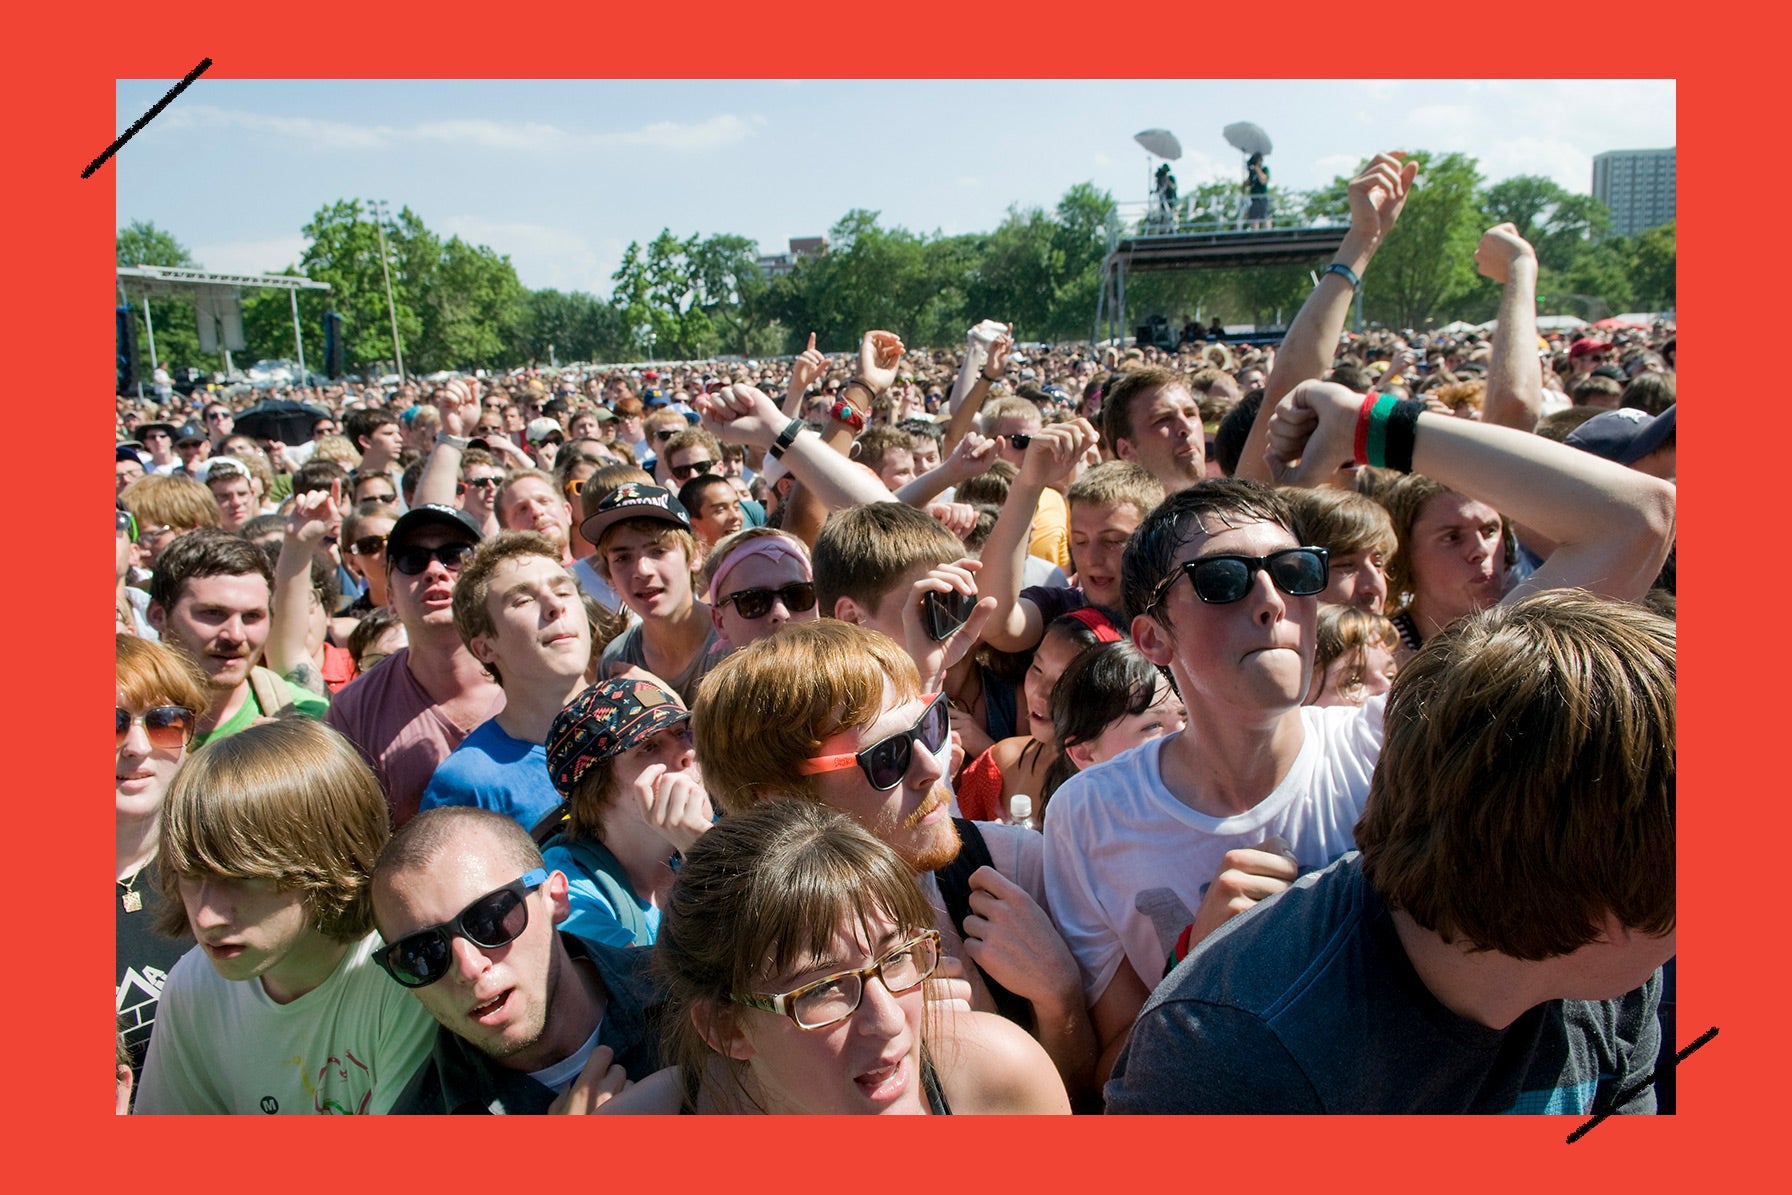 A crowd of people as seen from the stage at a sunny outdoor music festival.